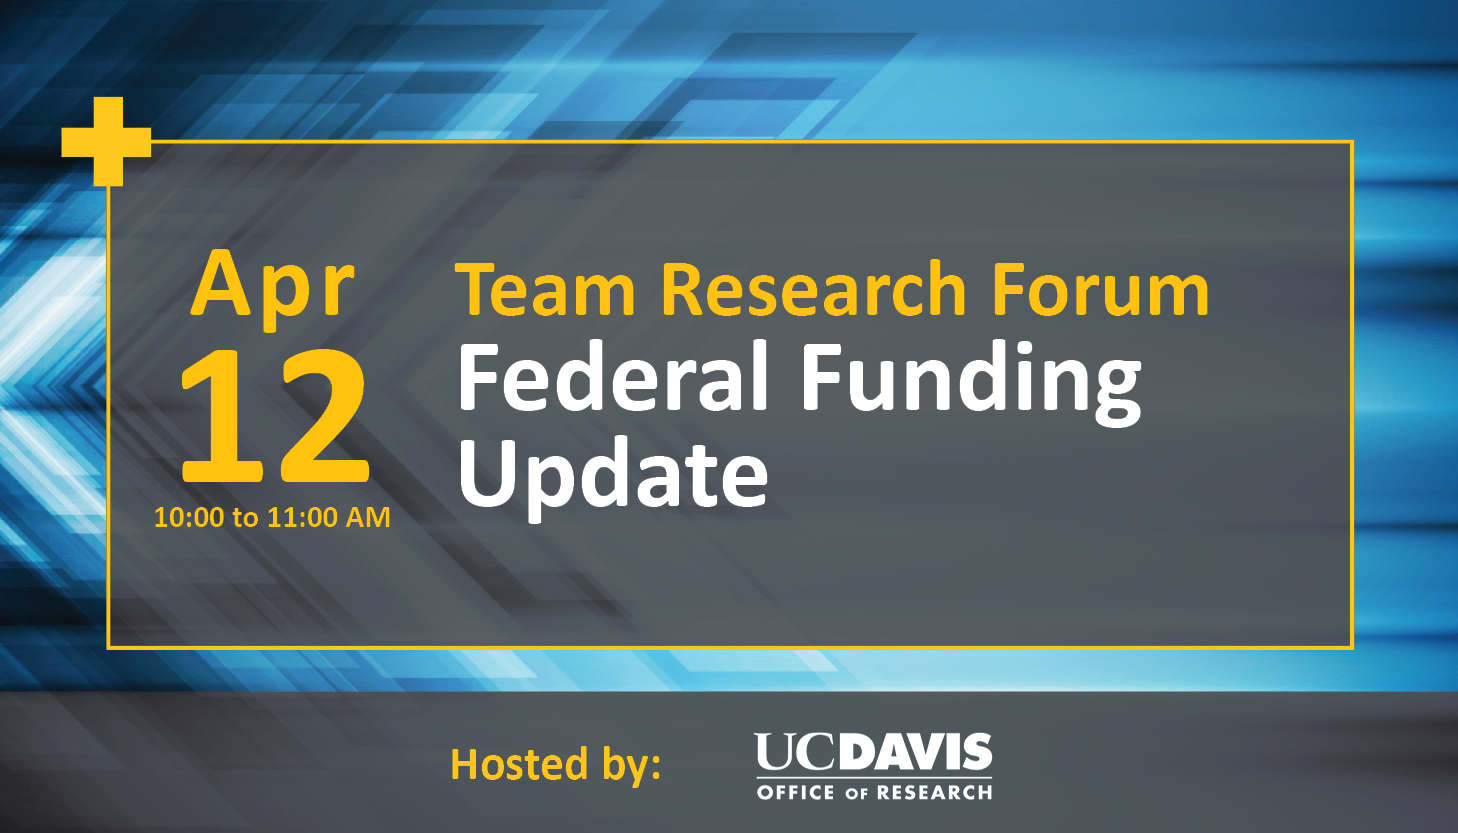 Team Research Forum: Federal Funding Update